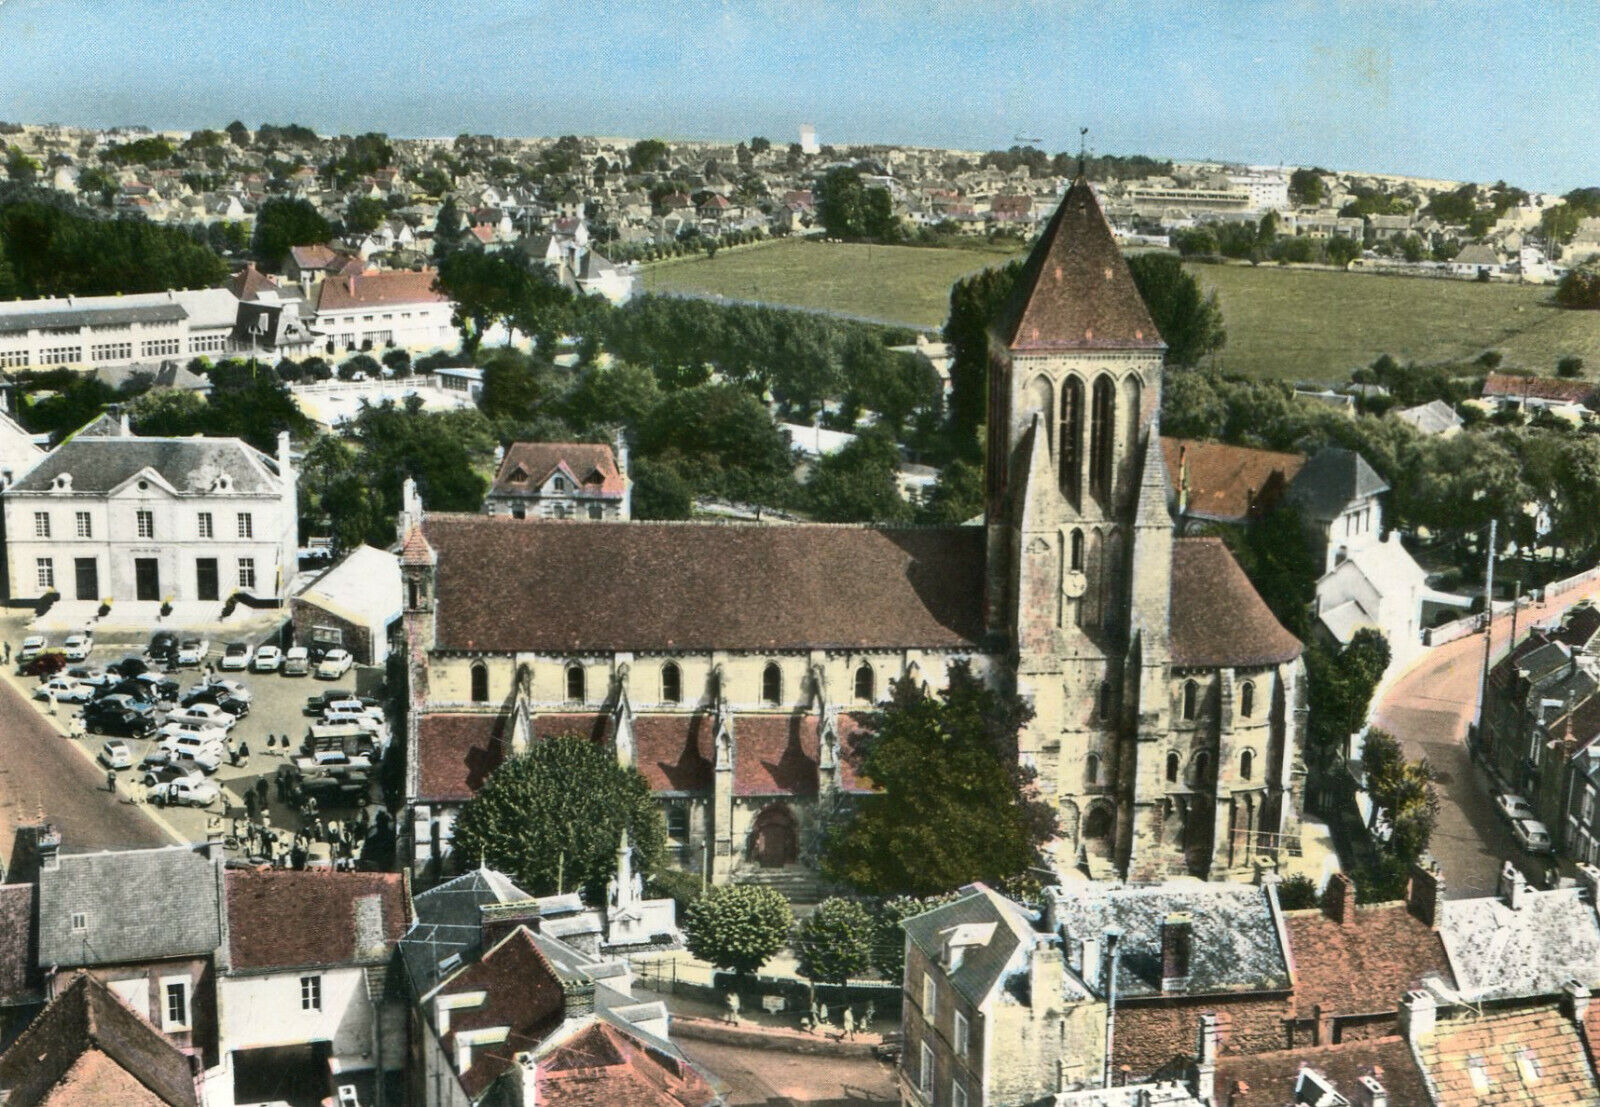 OUISTREHAM RIVA BELLA Map Aerial Panoramic View The Church